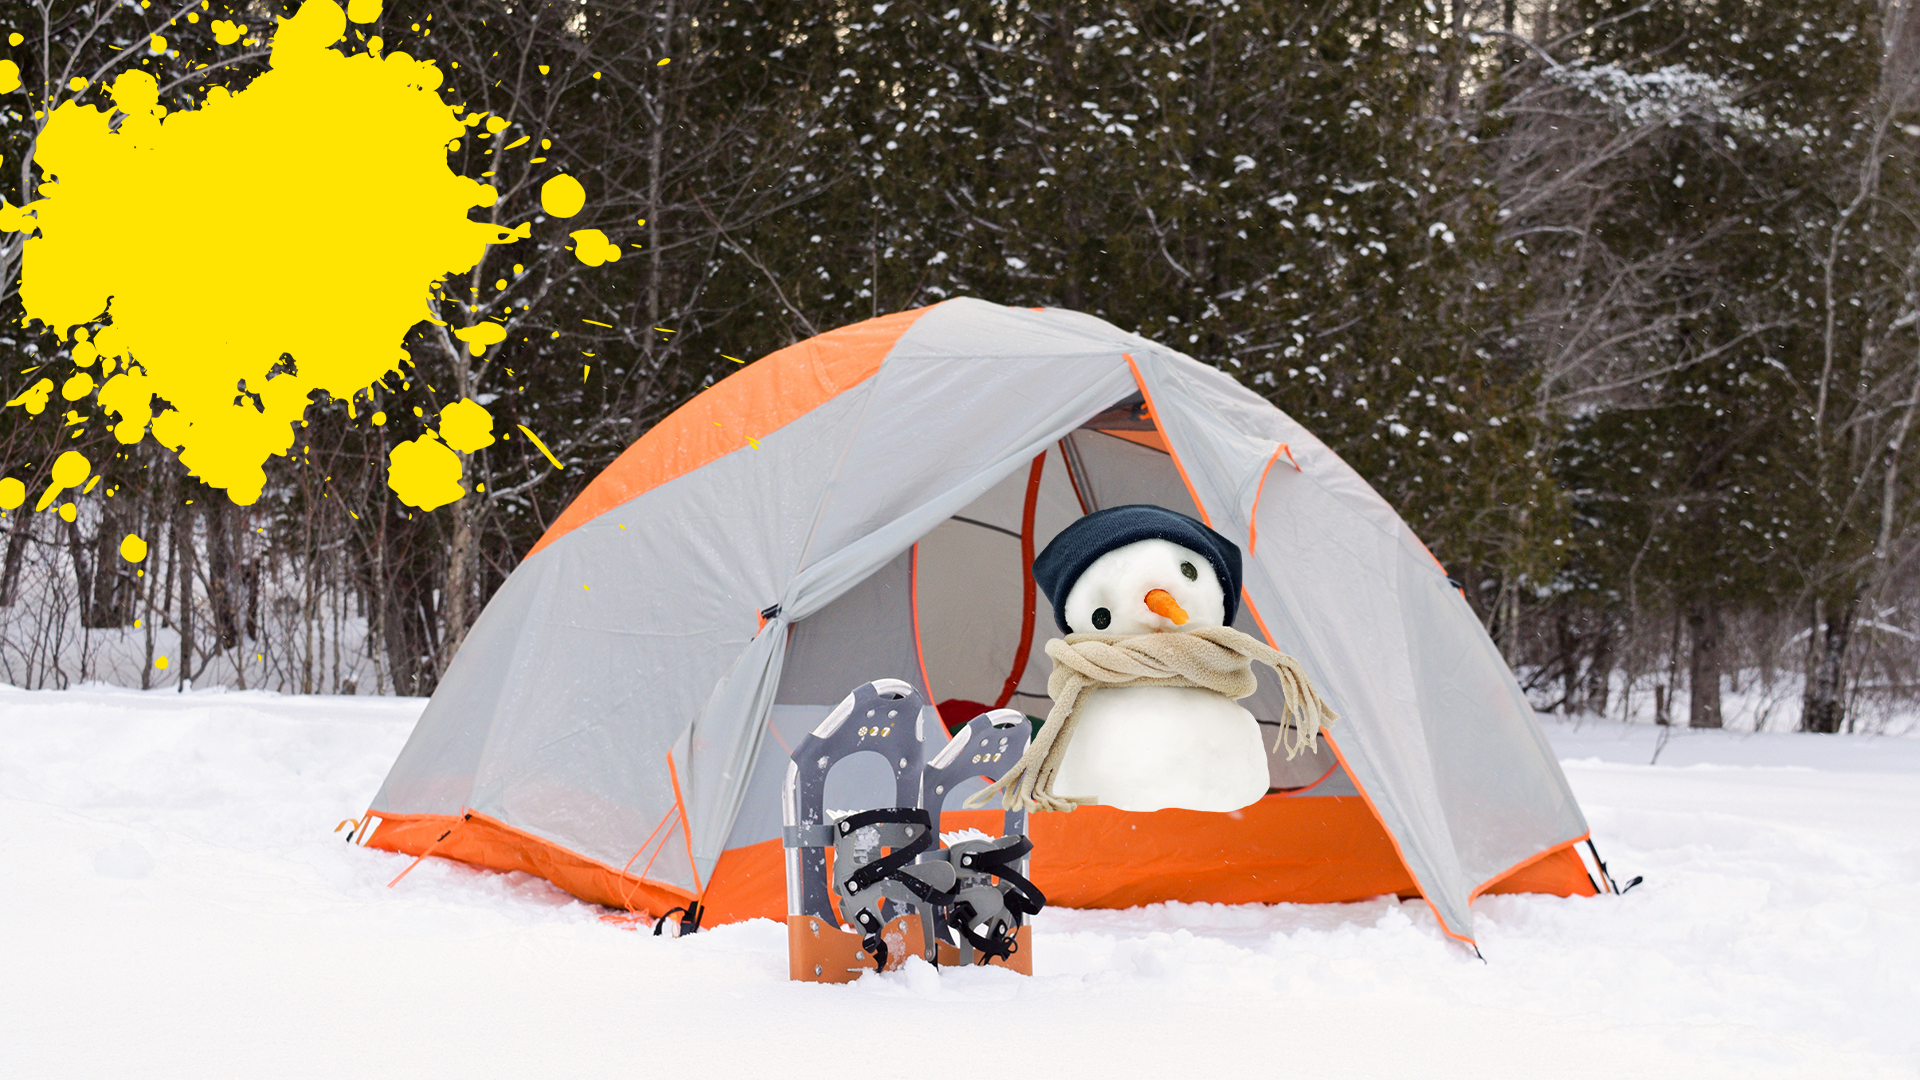 Snowman in tent in snowy woods with yellow splat